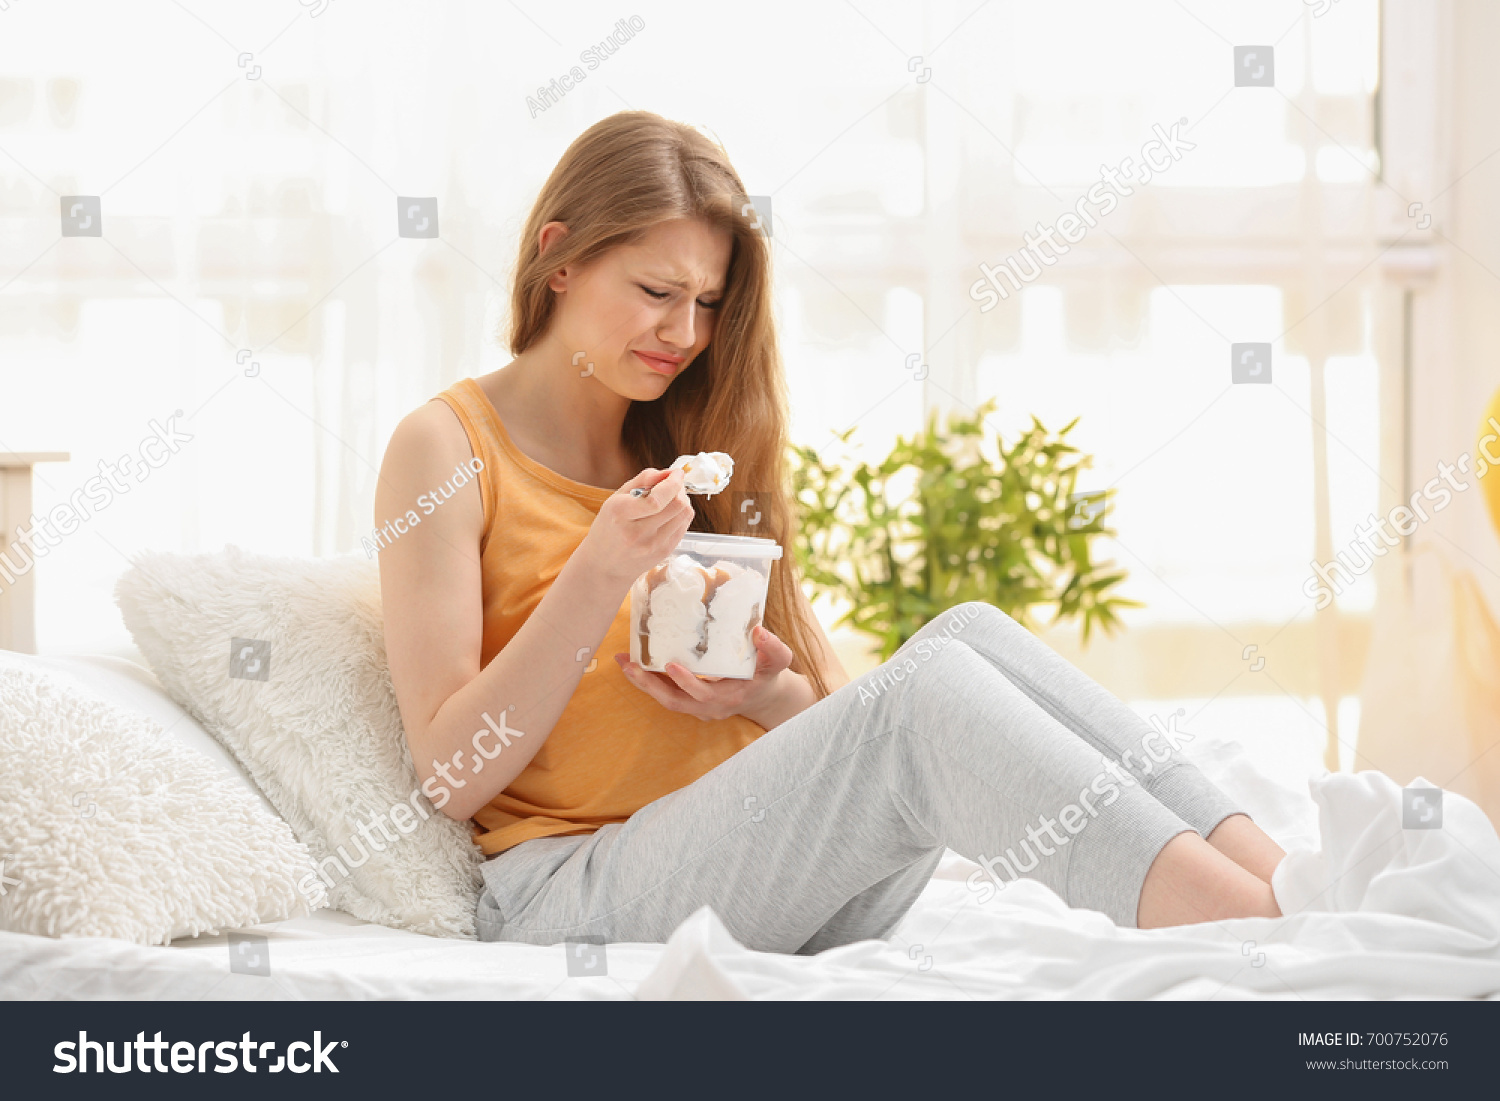 Emotional pregnant woman eating ice-cream in light room. Pregnancy hormones concept #700752076